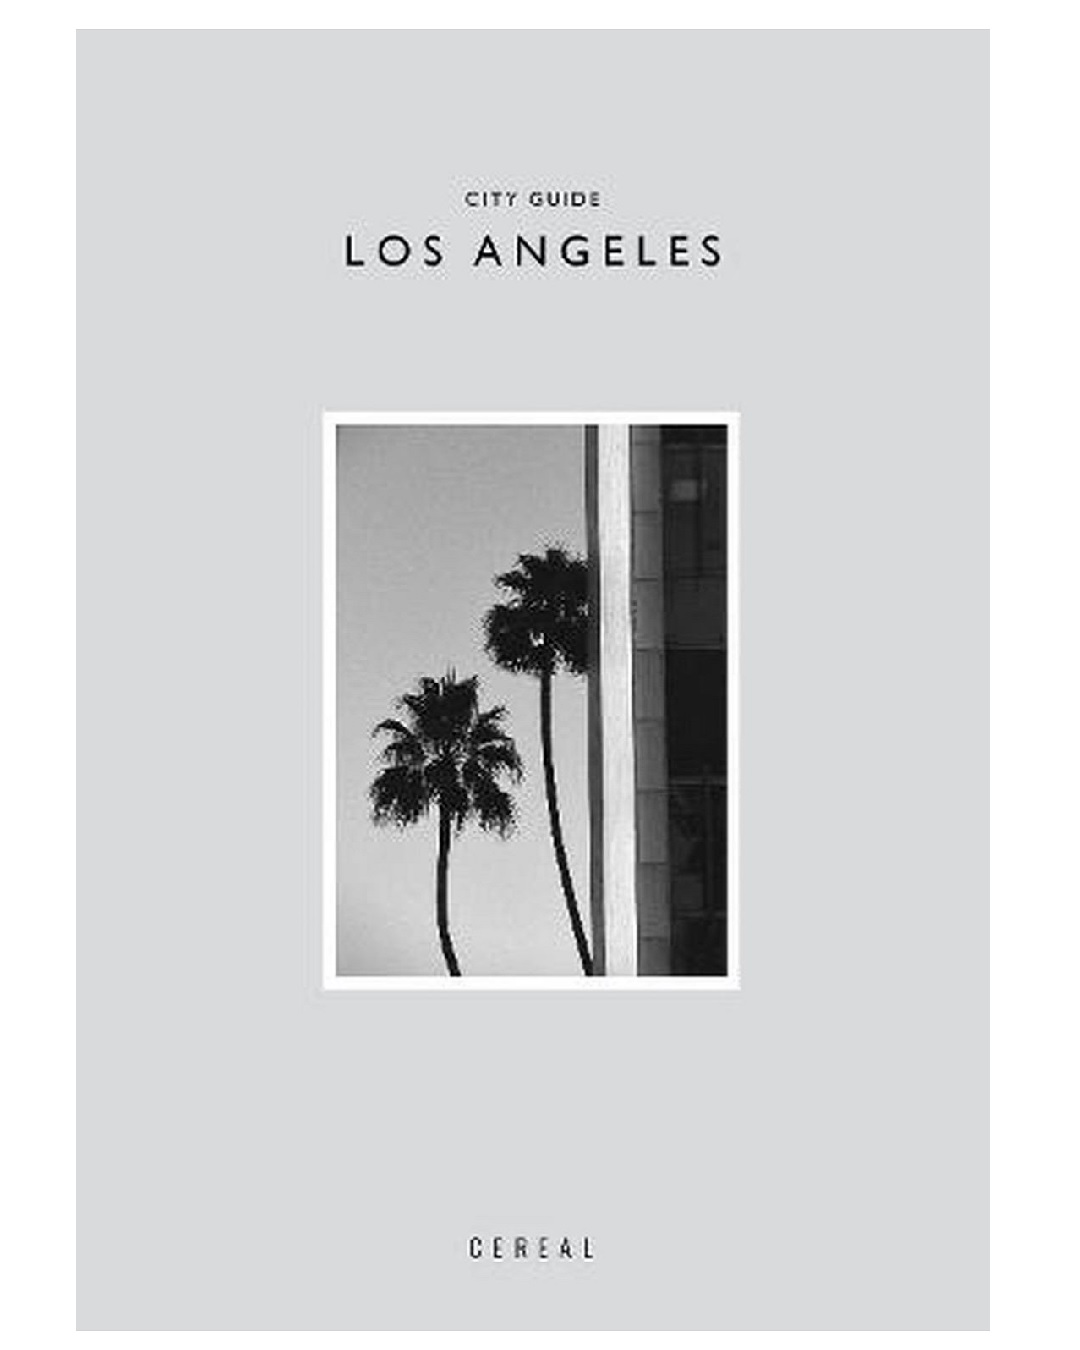 Los Angeles Cereal city guide